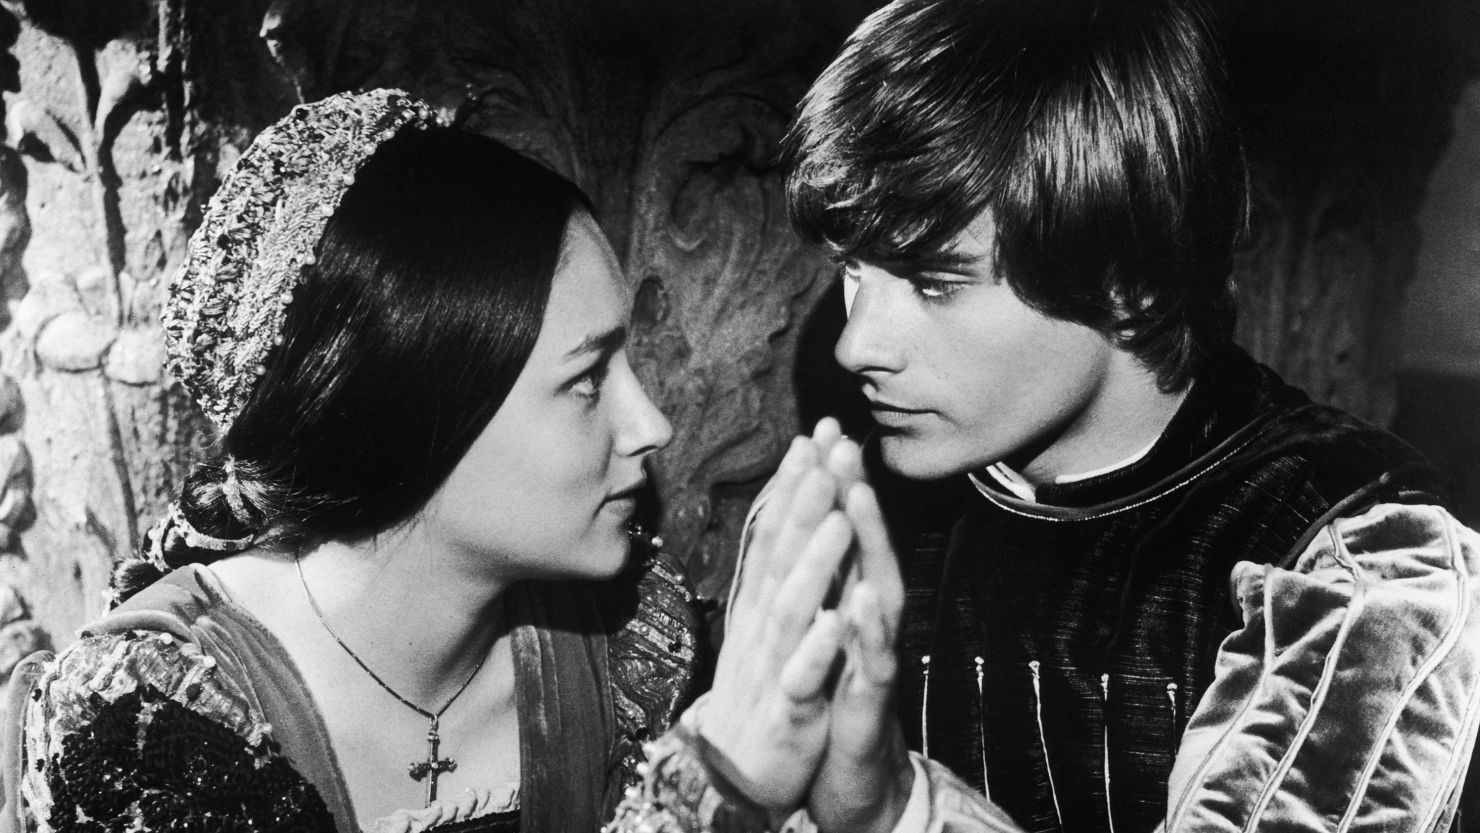 Leonard Whiting and Olivia Hussey in the title roles of Franco Zeffirelli's film version of Shakespeare's 'Romeo And Juliet', released in 1968.